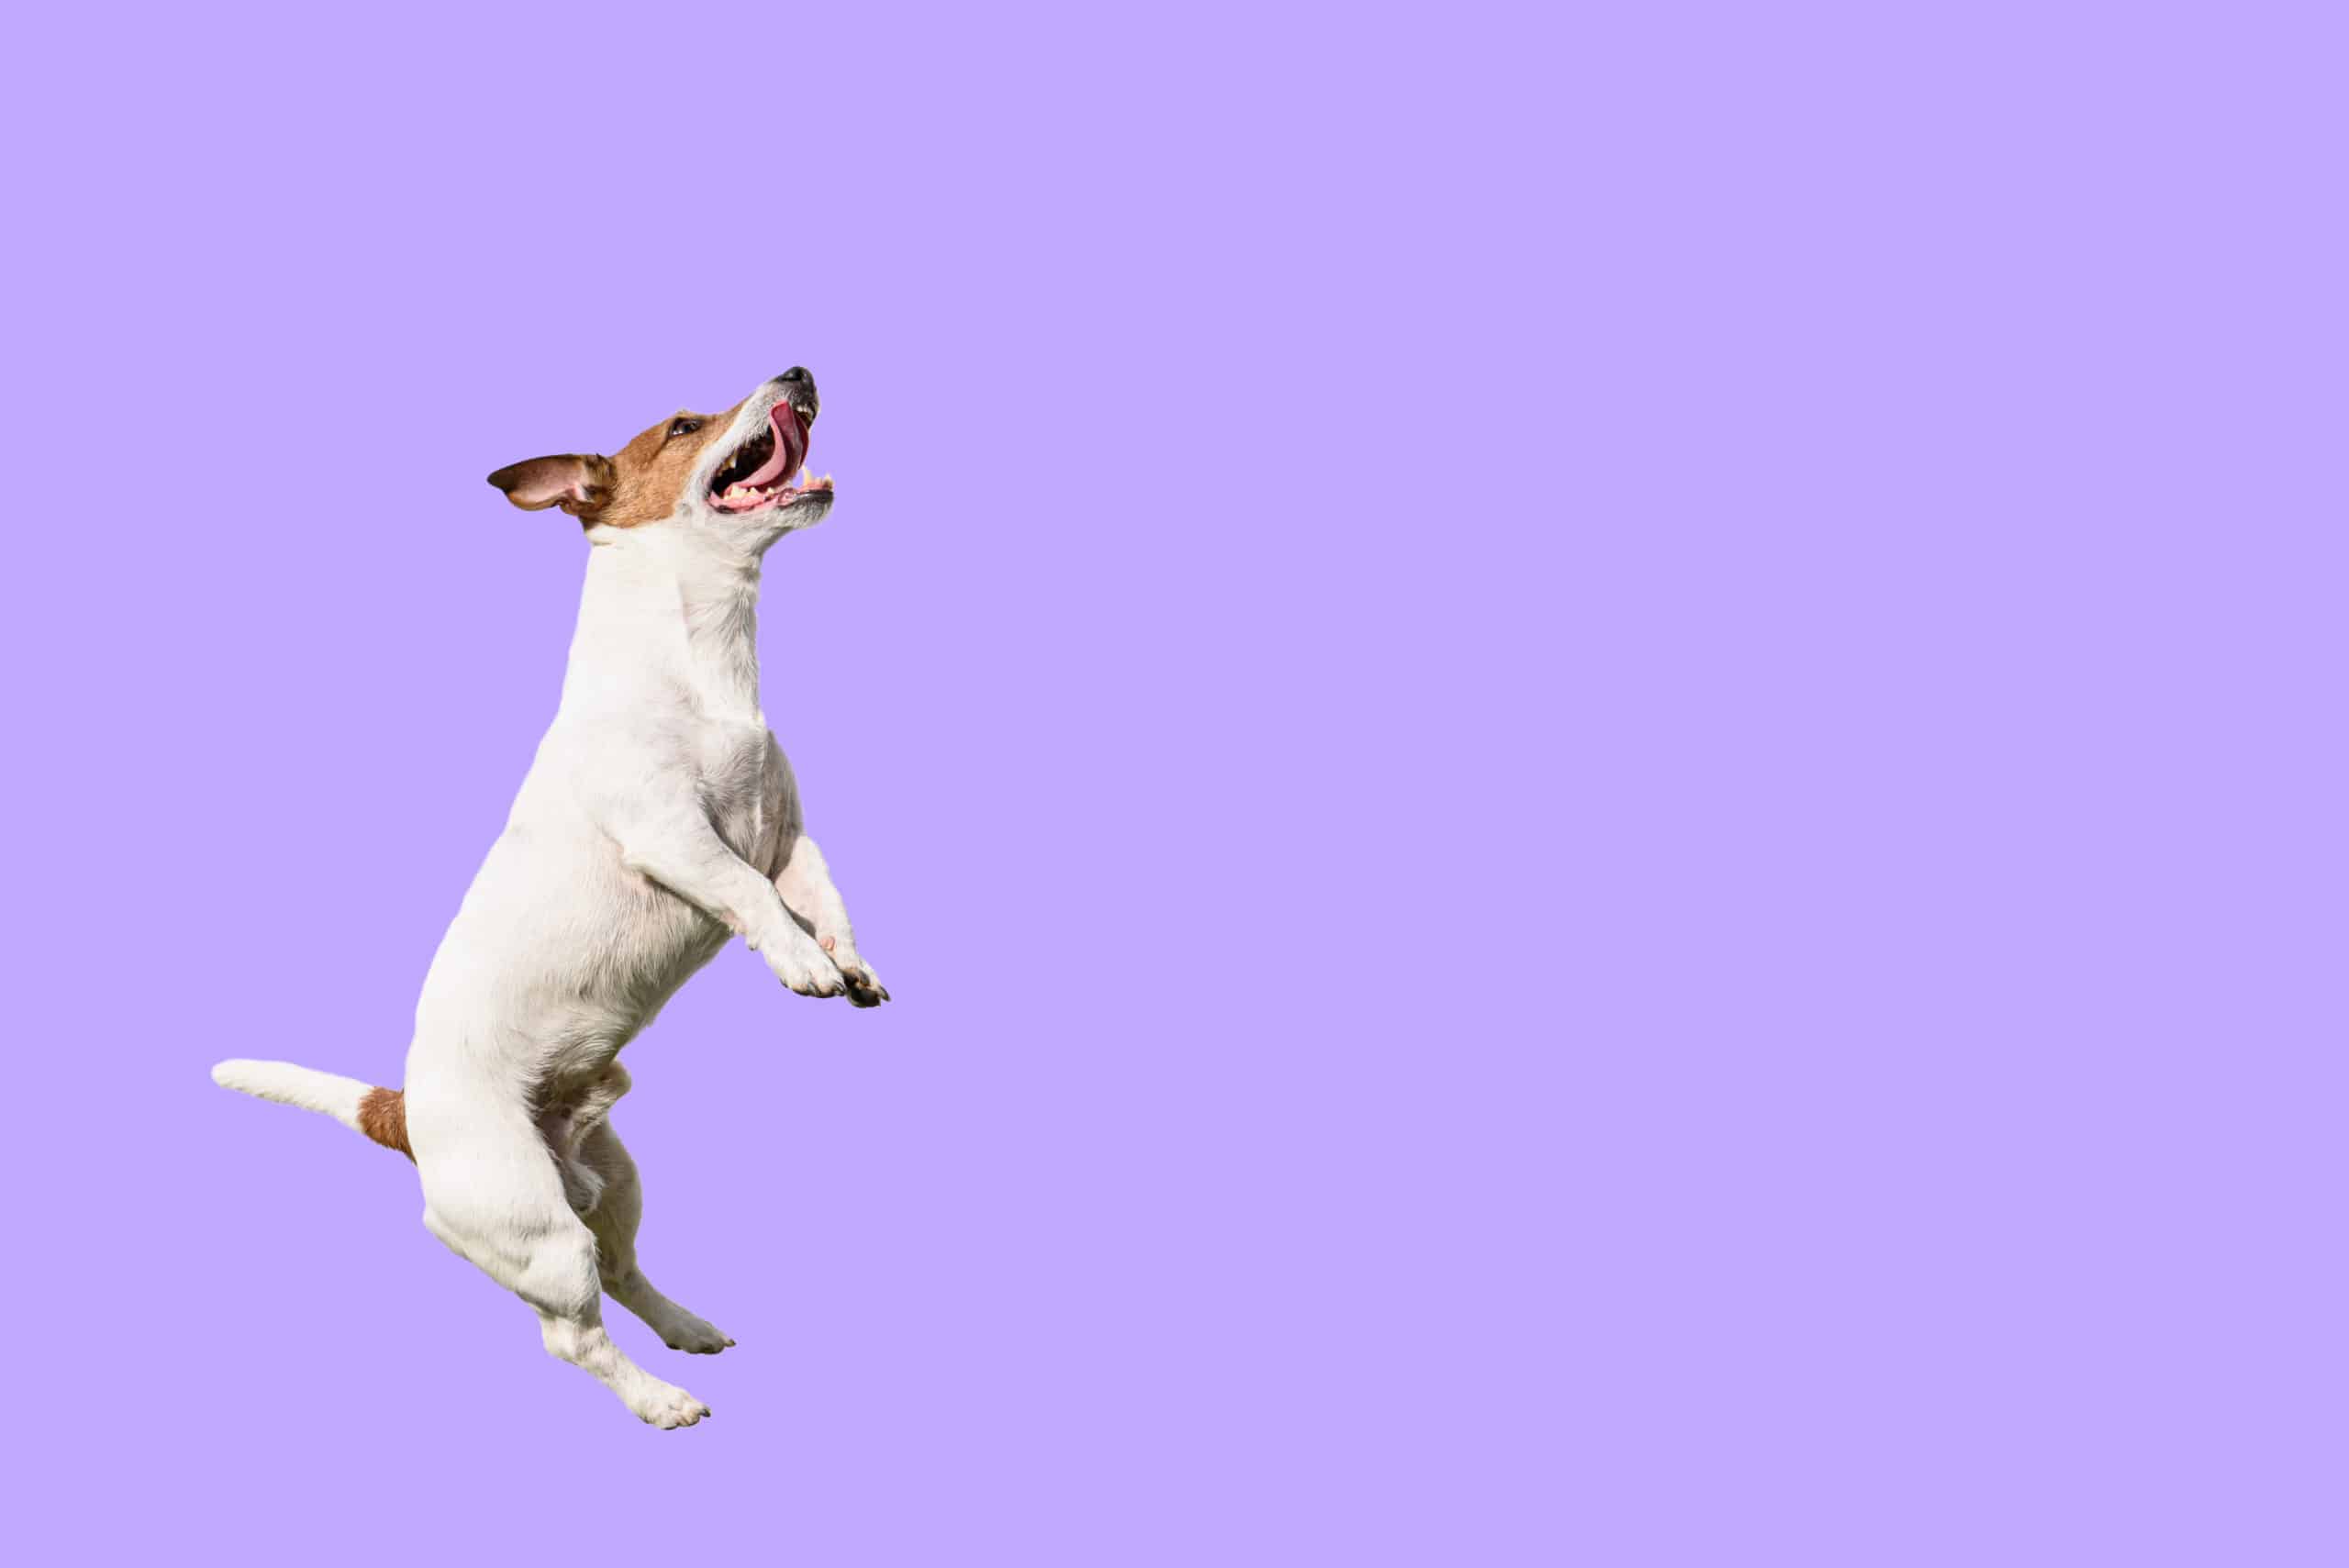 Active and agile dog jumping high on solid color purple background